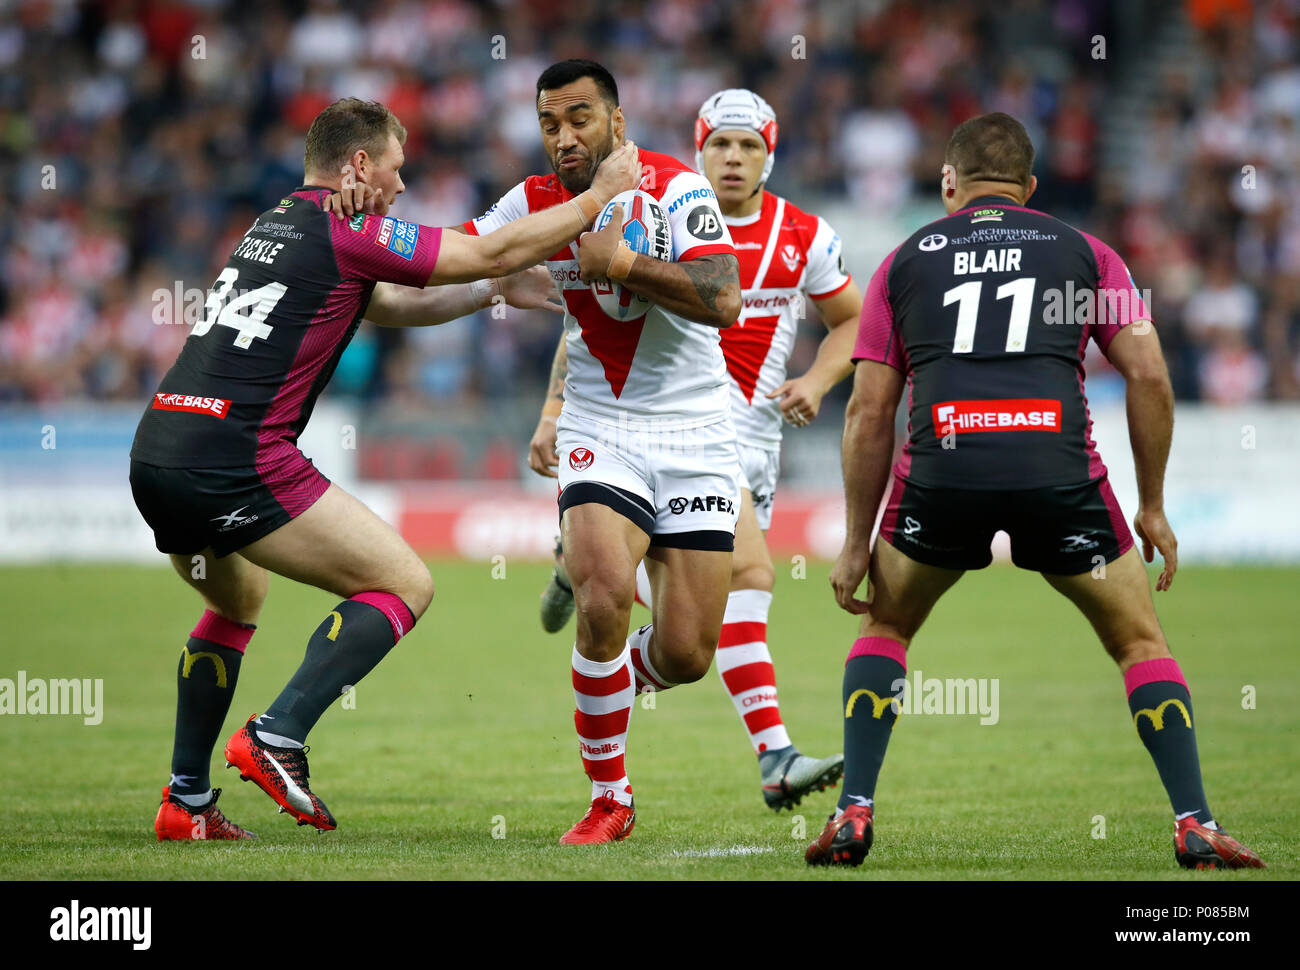 St Helens' Zeb Taia (centre) is tackled by Hull KR's Danny Tickle (left) and Maurice Blair during the Betfred Super League match at the Totally Wicked Stadium, St Helens. Stock Photo